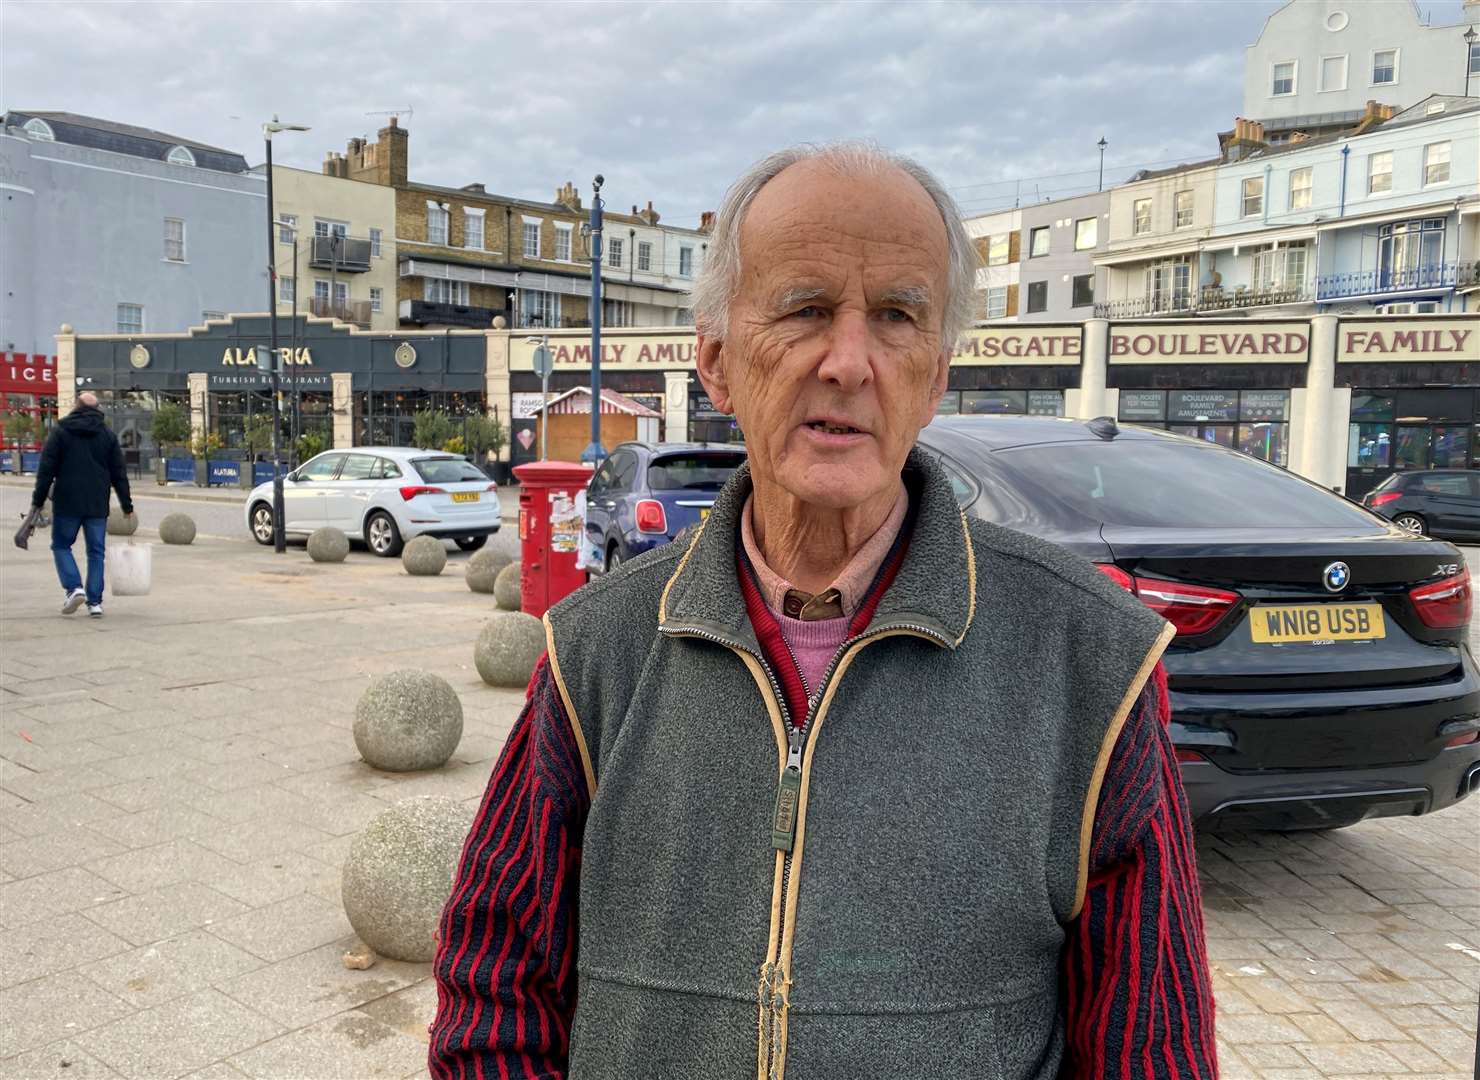 Robert Hedde, 82, saw the effects of crime in Thanet as he worked as a surgeon in the area